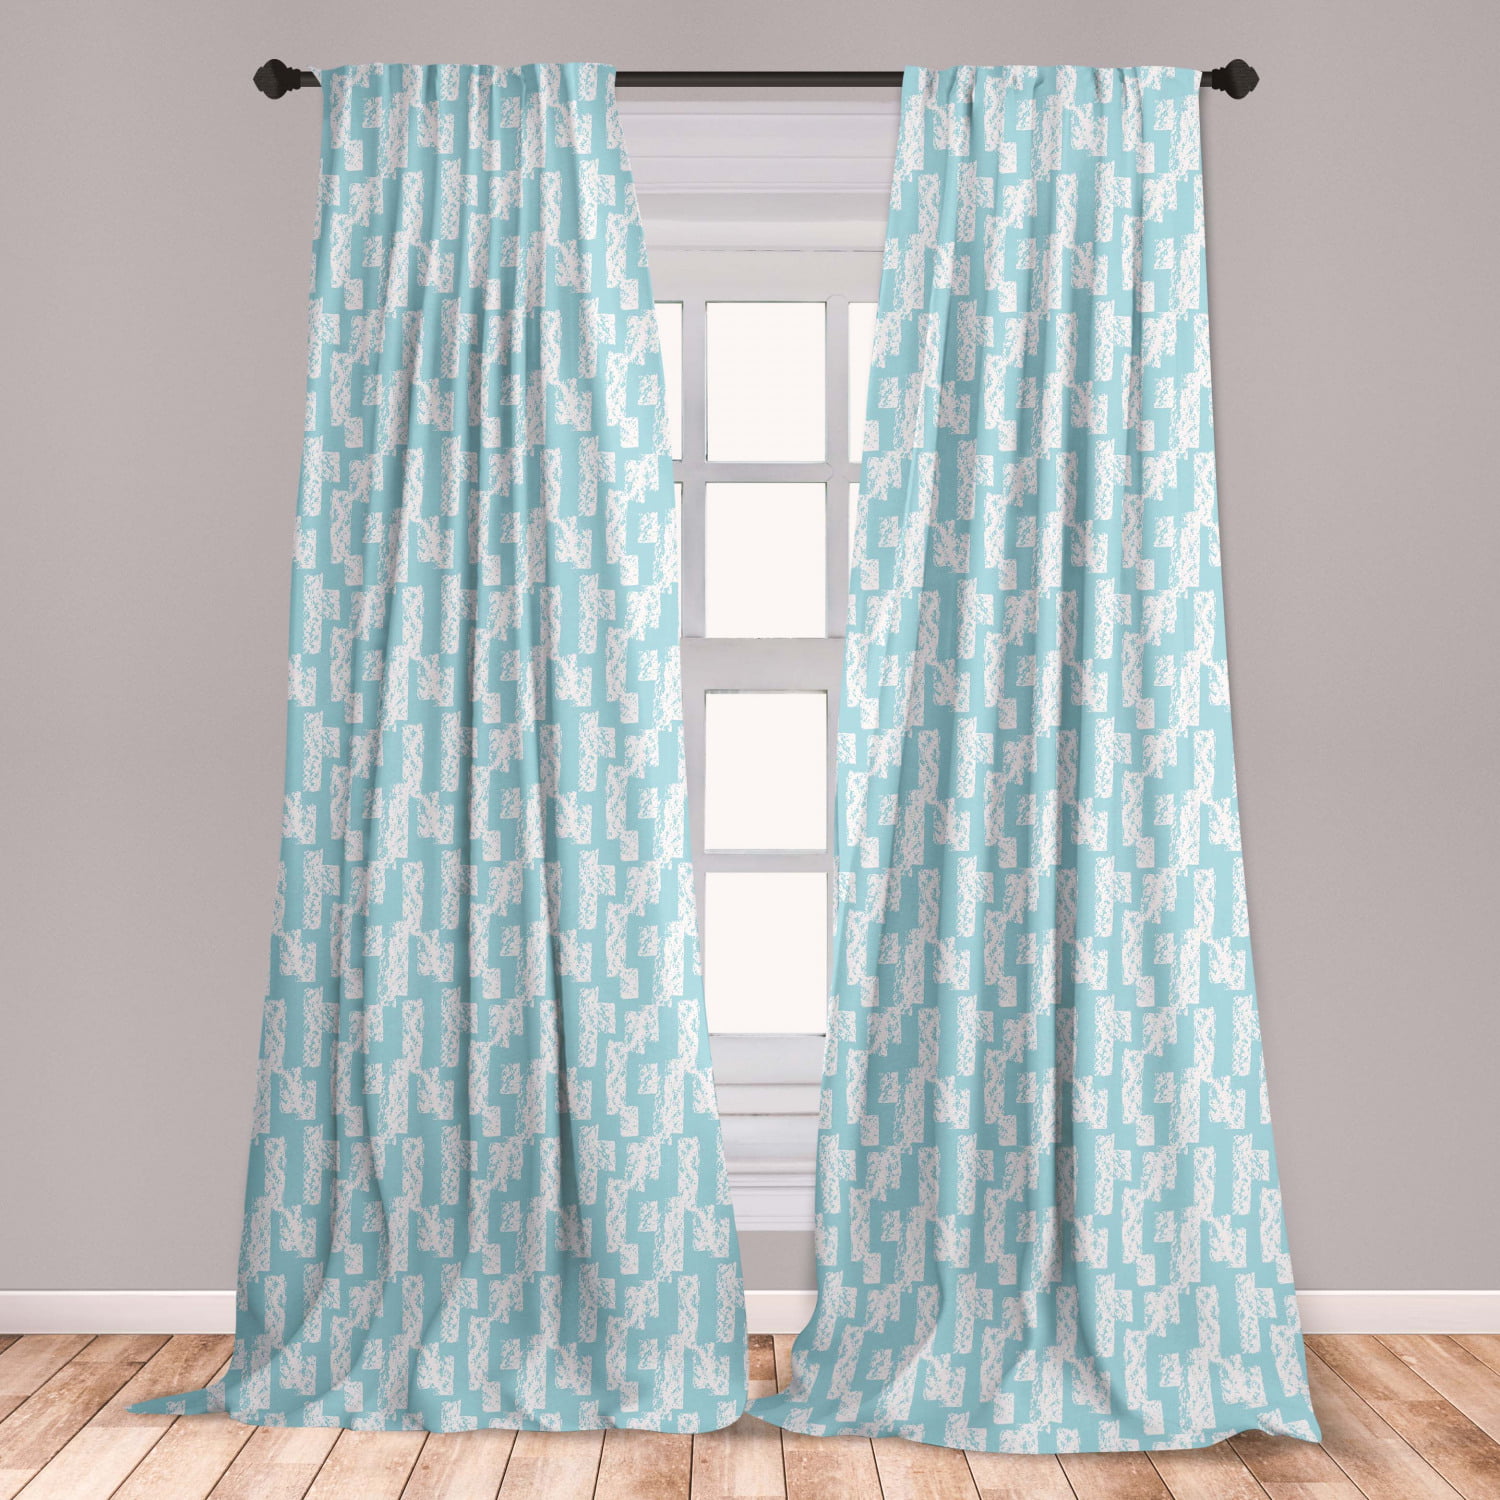 Pale Blue Curtains 2 Panels Set, Wall with Brushstrokes Modern Art Inspired Minimalist Design